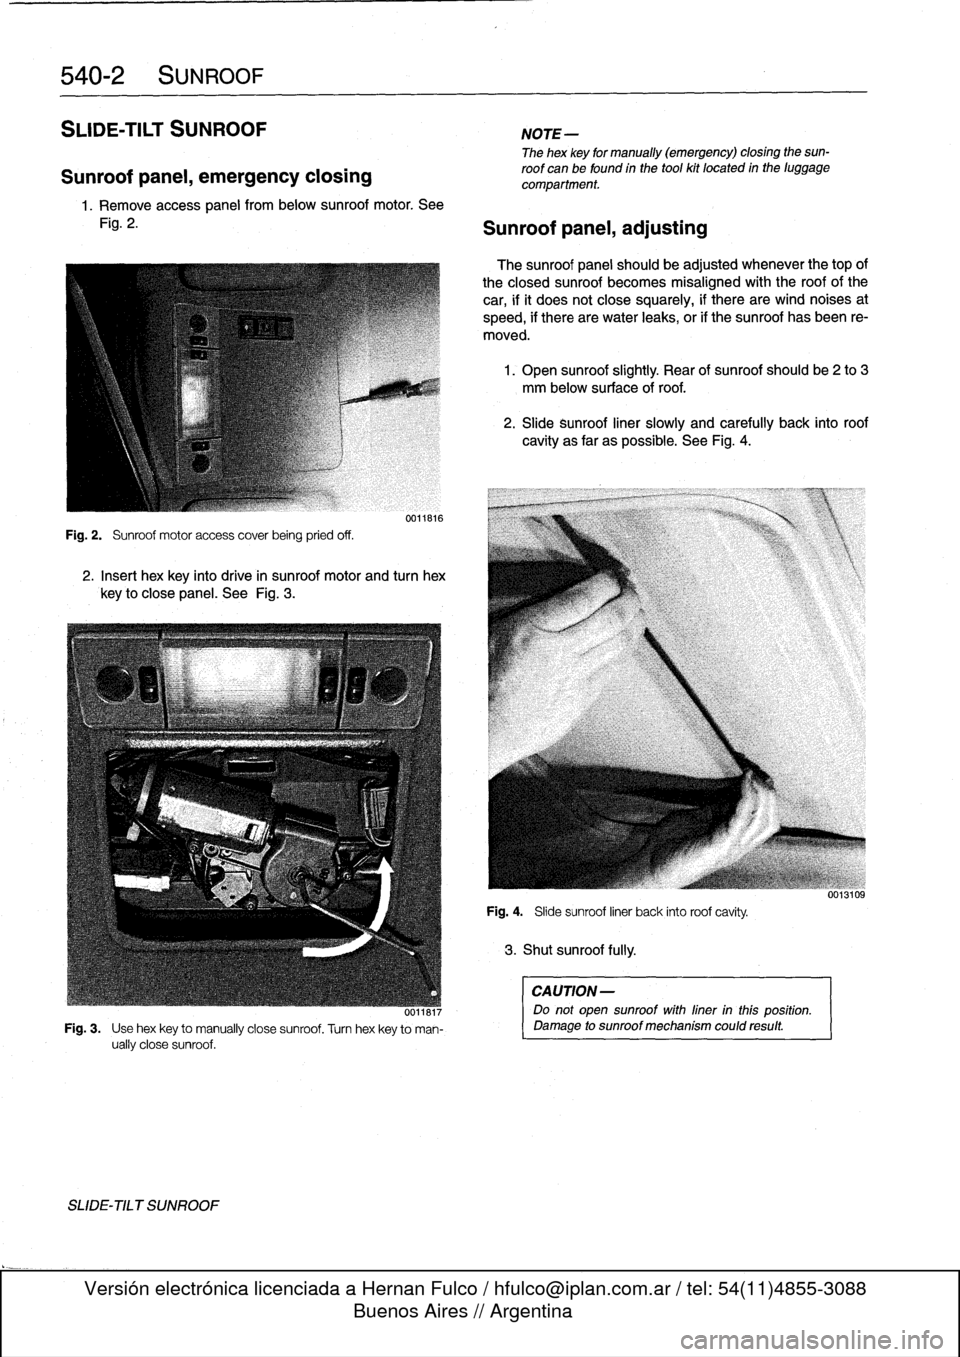 BMW 318i 1995 E36 Workshop Manual 
540-2
SUNROOF

SLIDE-TILT
SUNROOF

Sunroof
panel,
emergency
closing

1.
Remove
access
panel
frombelow
sunroof
motor
.
See

Fig
.
2
.

Fig
.
2
.

	

Sunroof
motor
access
coverbeing
pried
off
.

001181